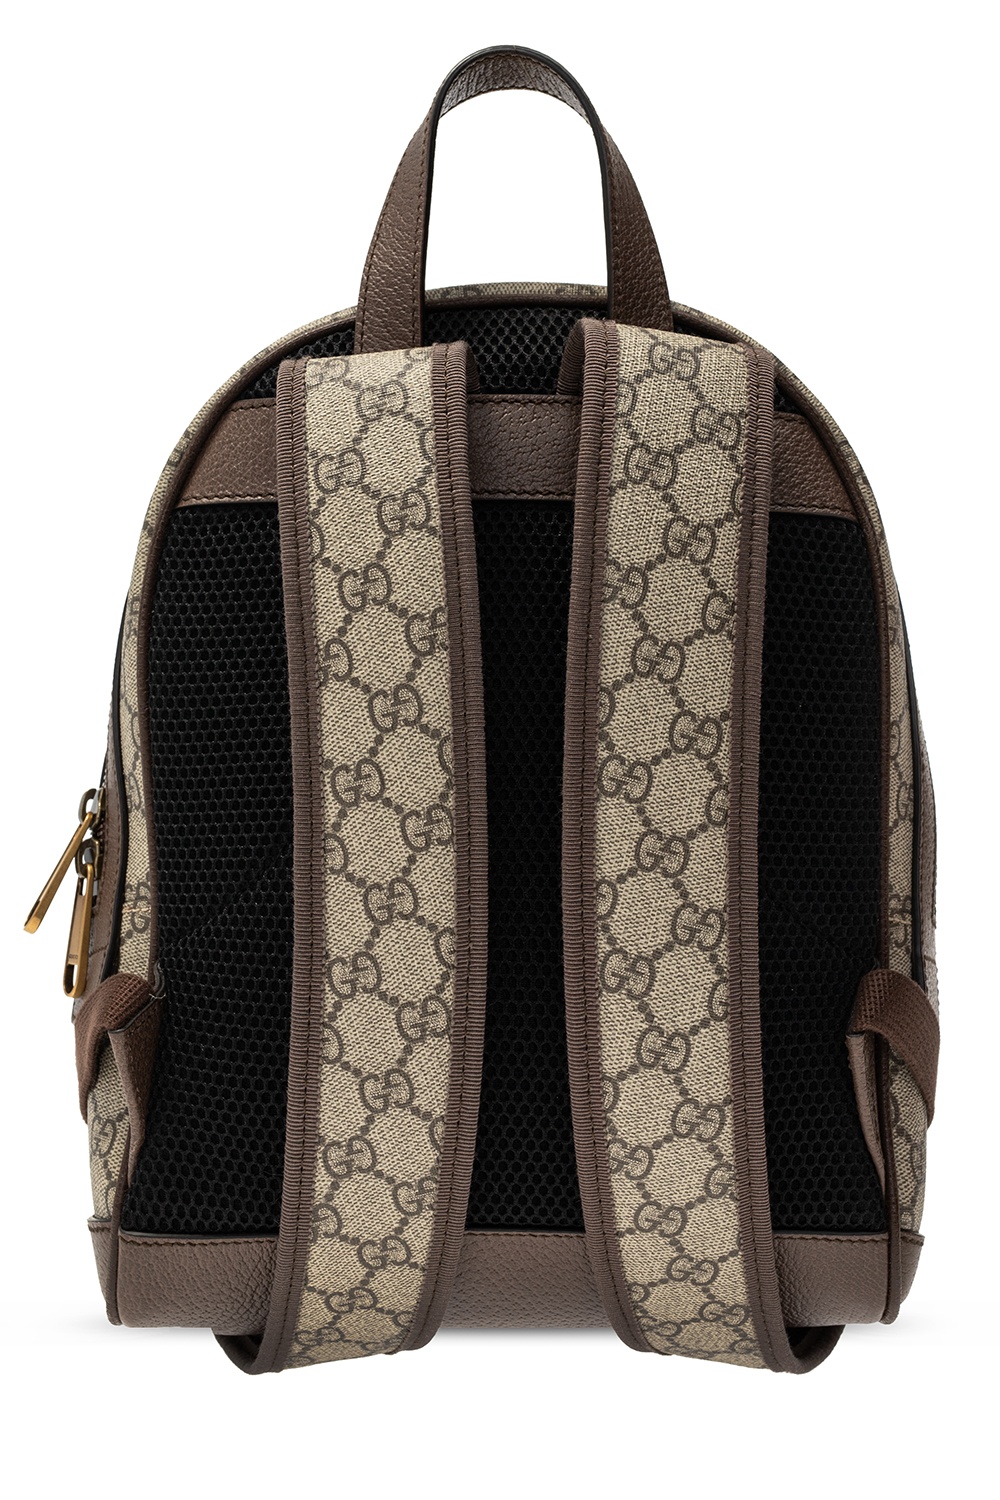 BALO GUCCI OPHIDIA GG SMALL BACKPACK 1